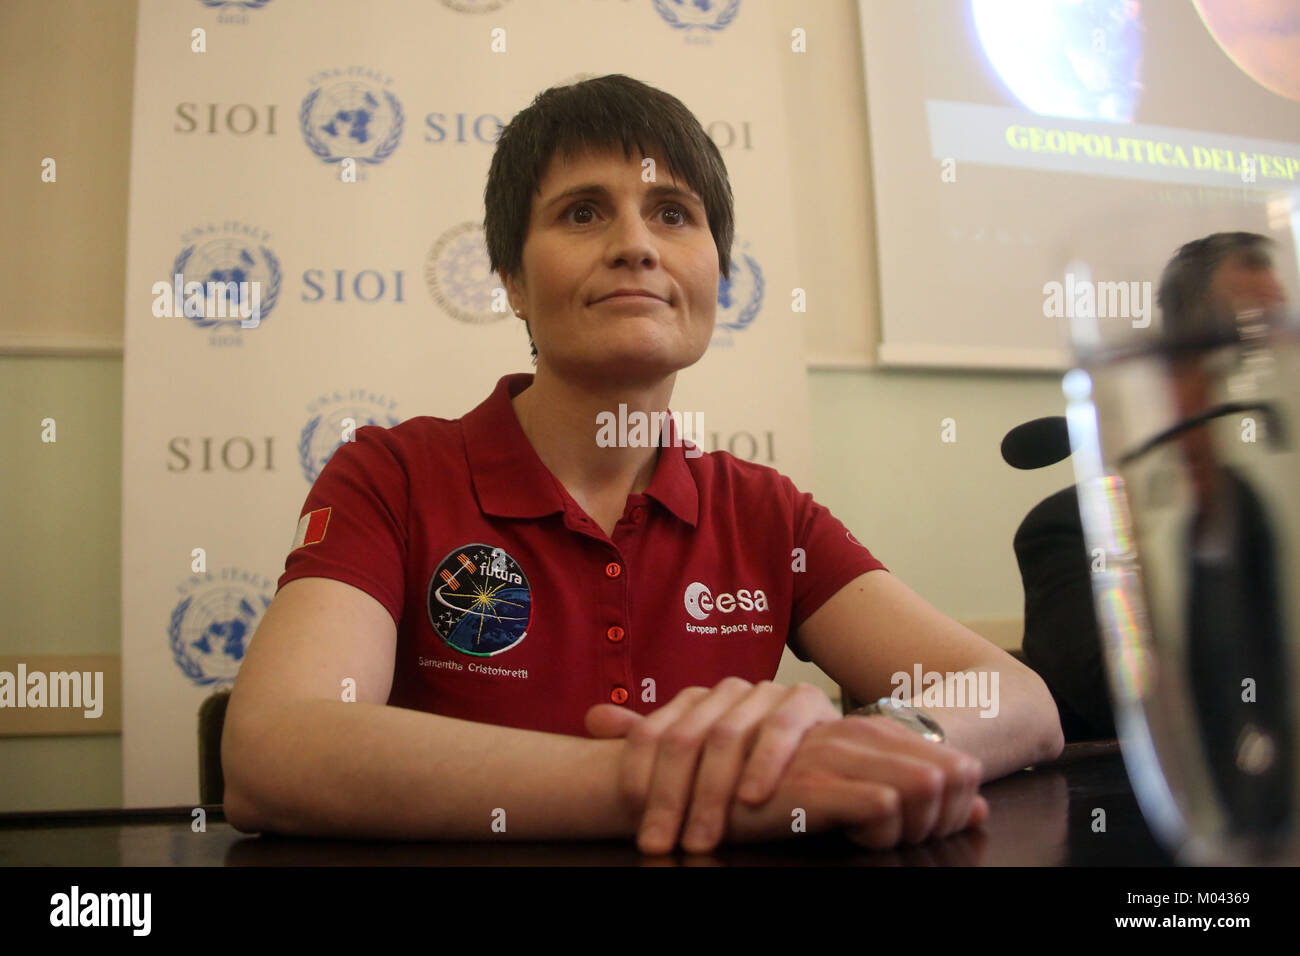 Rome, Italy. 18th Jan, 2018. 18.01.2017. Rome, Italy: the astronaut Samantha Cristoforetti, guest at the Sioi headquarters in Rome, at the conference for the presentation of the x edition of the Masters in institutions and space poles 'traveling among the stars: from the Moon to Mars'. Credit: Independent Photo Agency/Alamy Live News Stock Photo